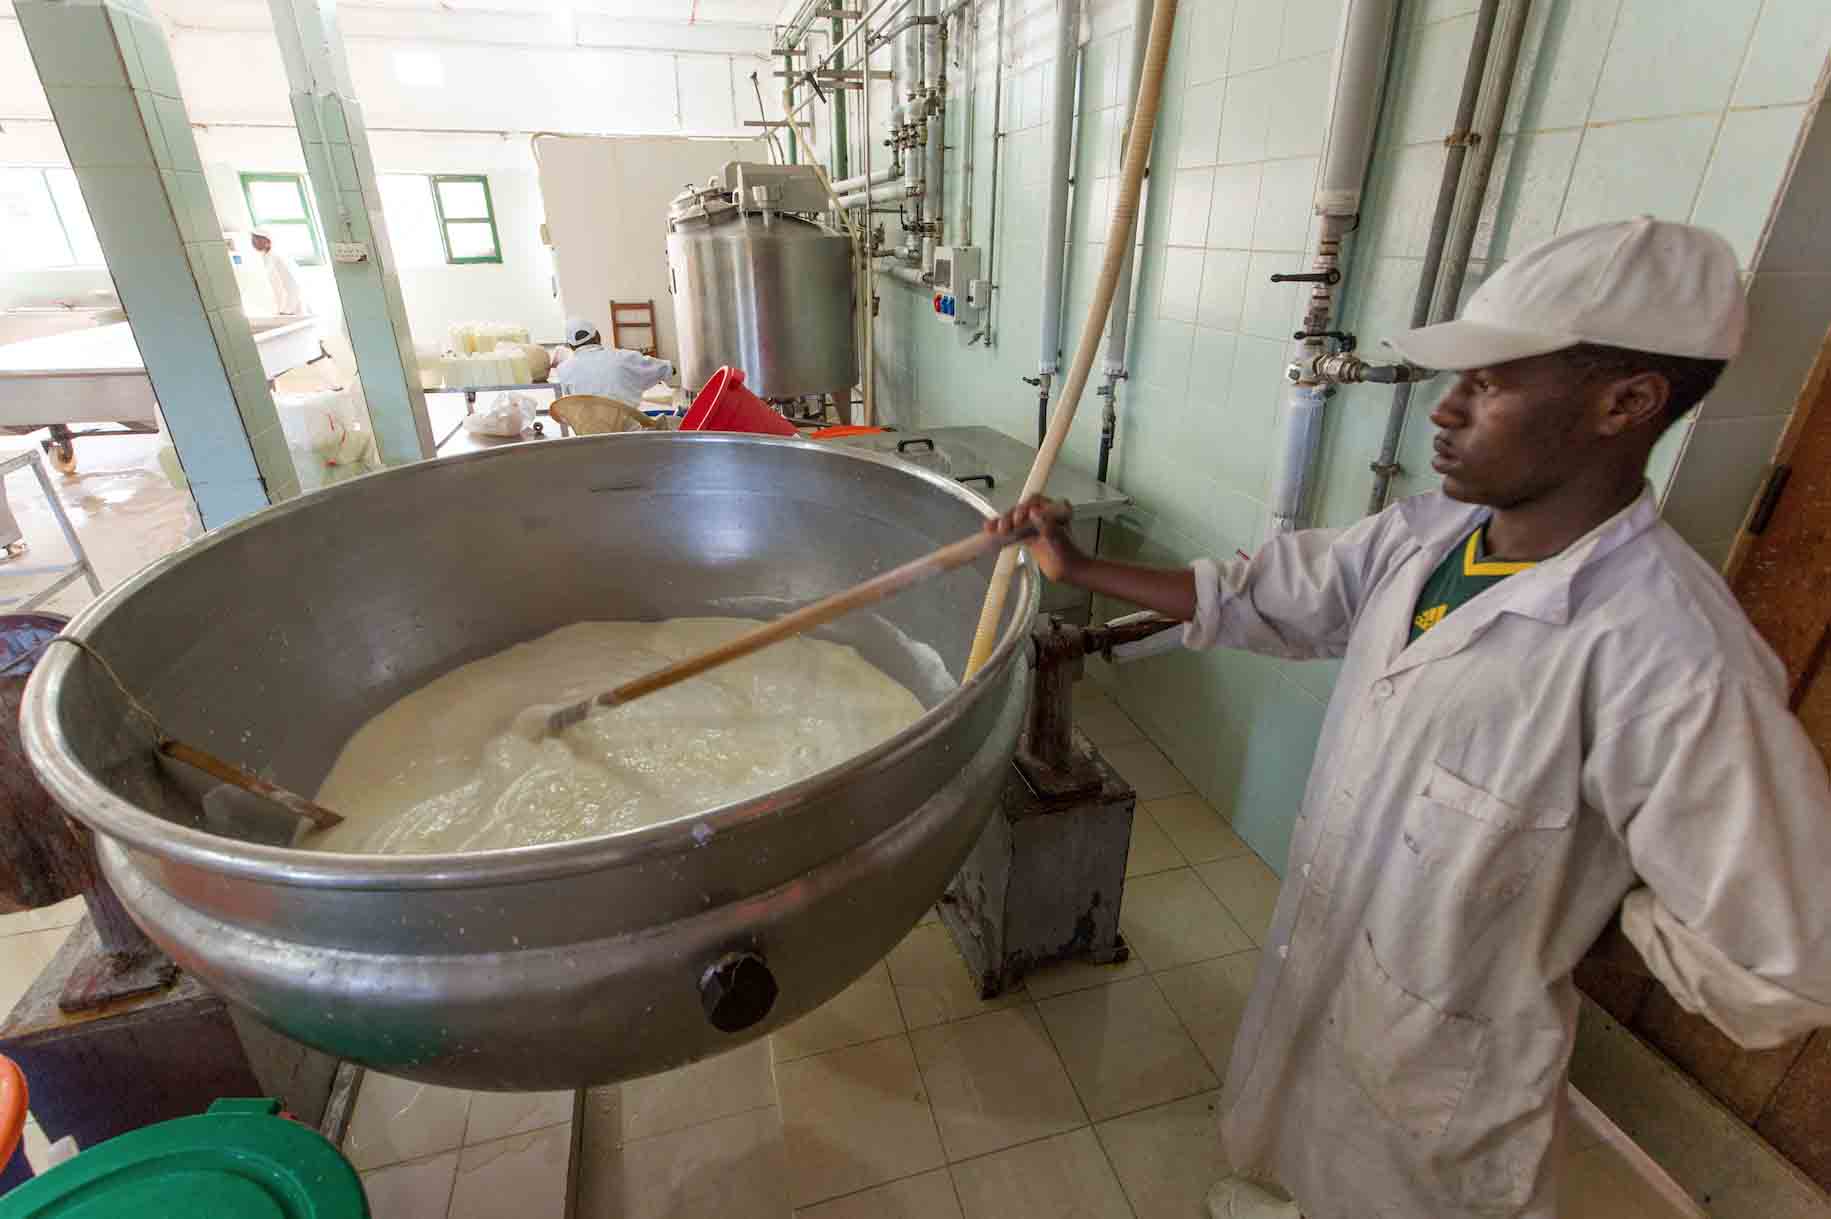 The East Africa Youth Inclusion Program is a groundbreaking initiative that builds on the success of our East Africa Dairy Development (EADD) program (shown here). EADD is one of the leading market-oriented development initiatives in East Africa.